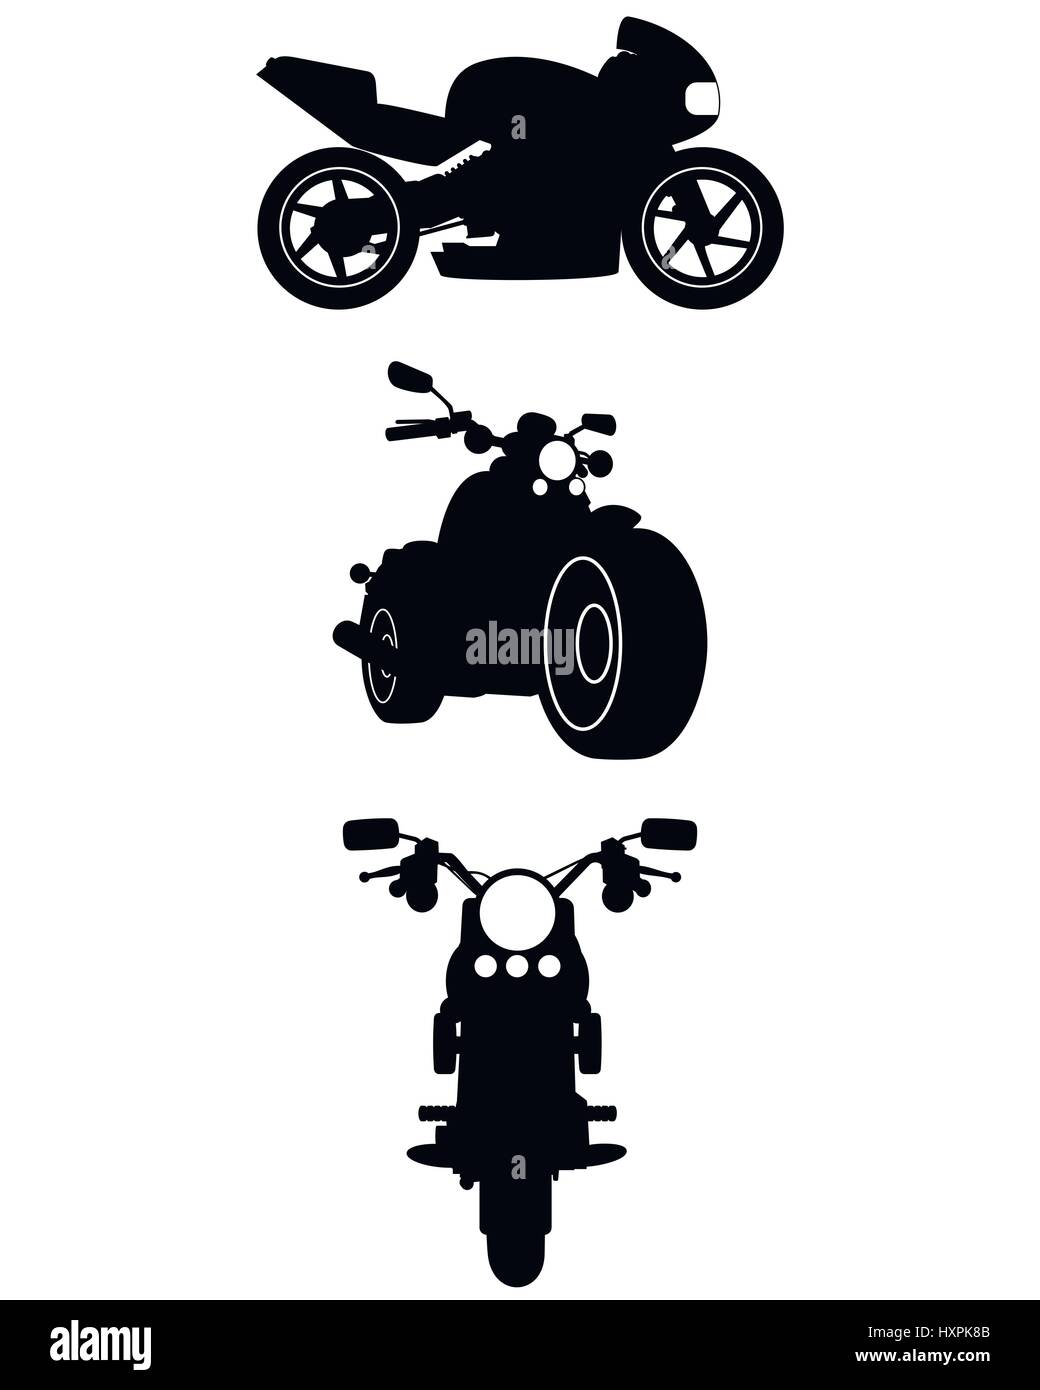 Vector illustration of three motorcycle silhouettes Stock Vector